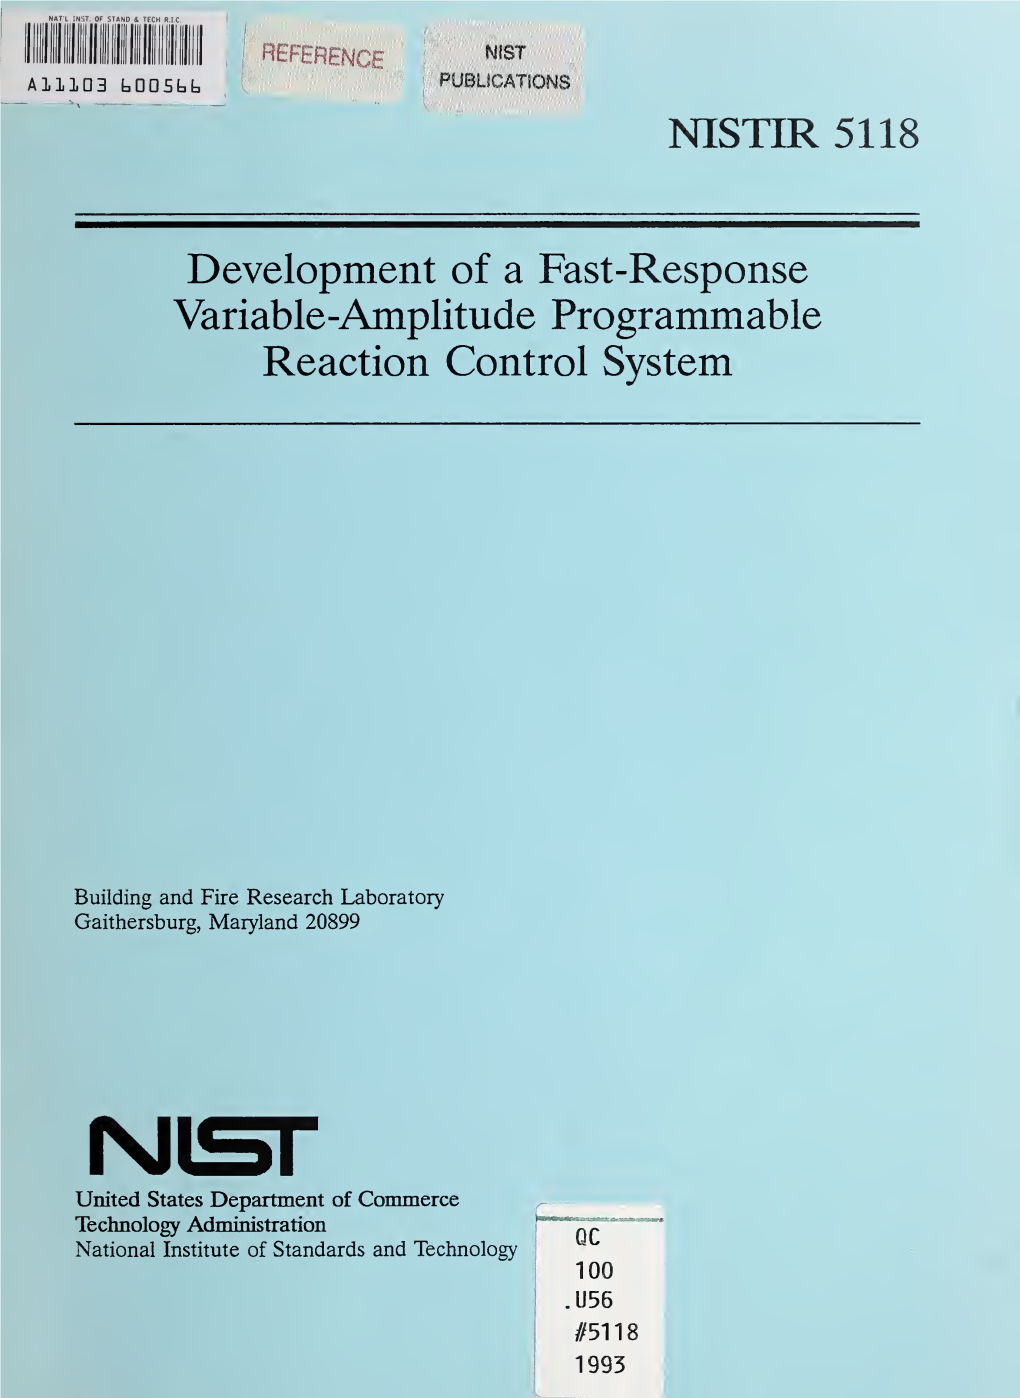 Development of a Fast-Response Variable-Amplitude Programmable Reaction Control System